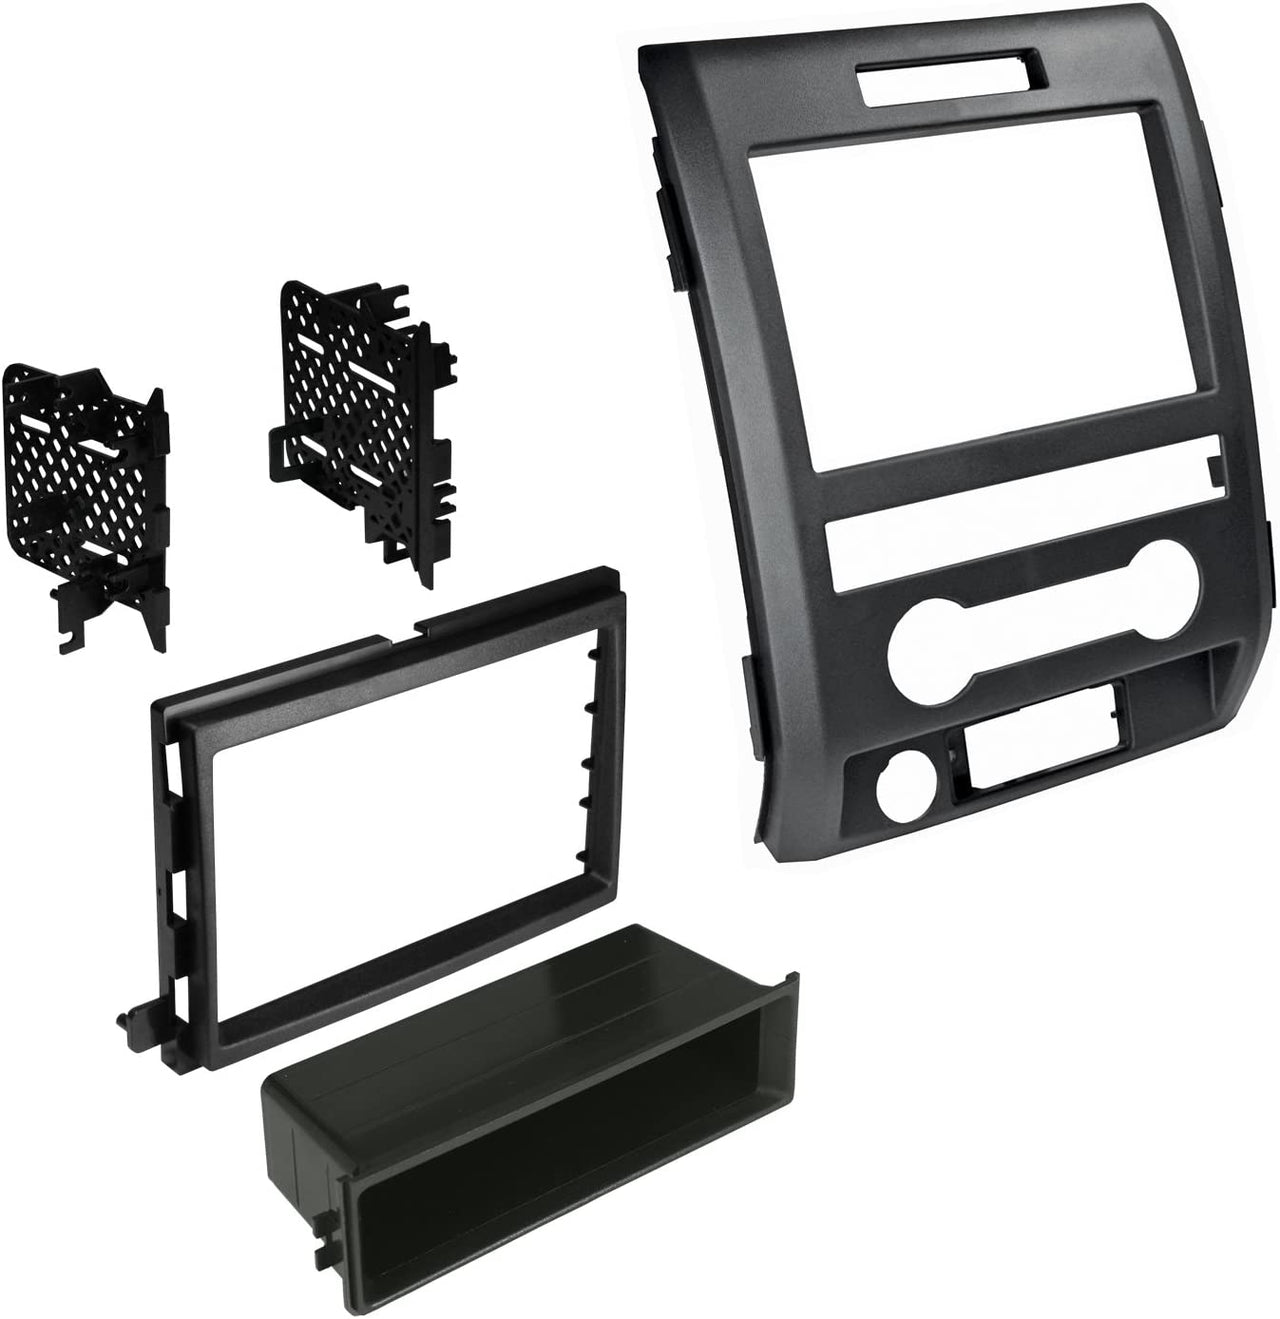 American International FMK526 Single/Double DIN Kit for 2009-2014 Ford F-150